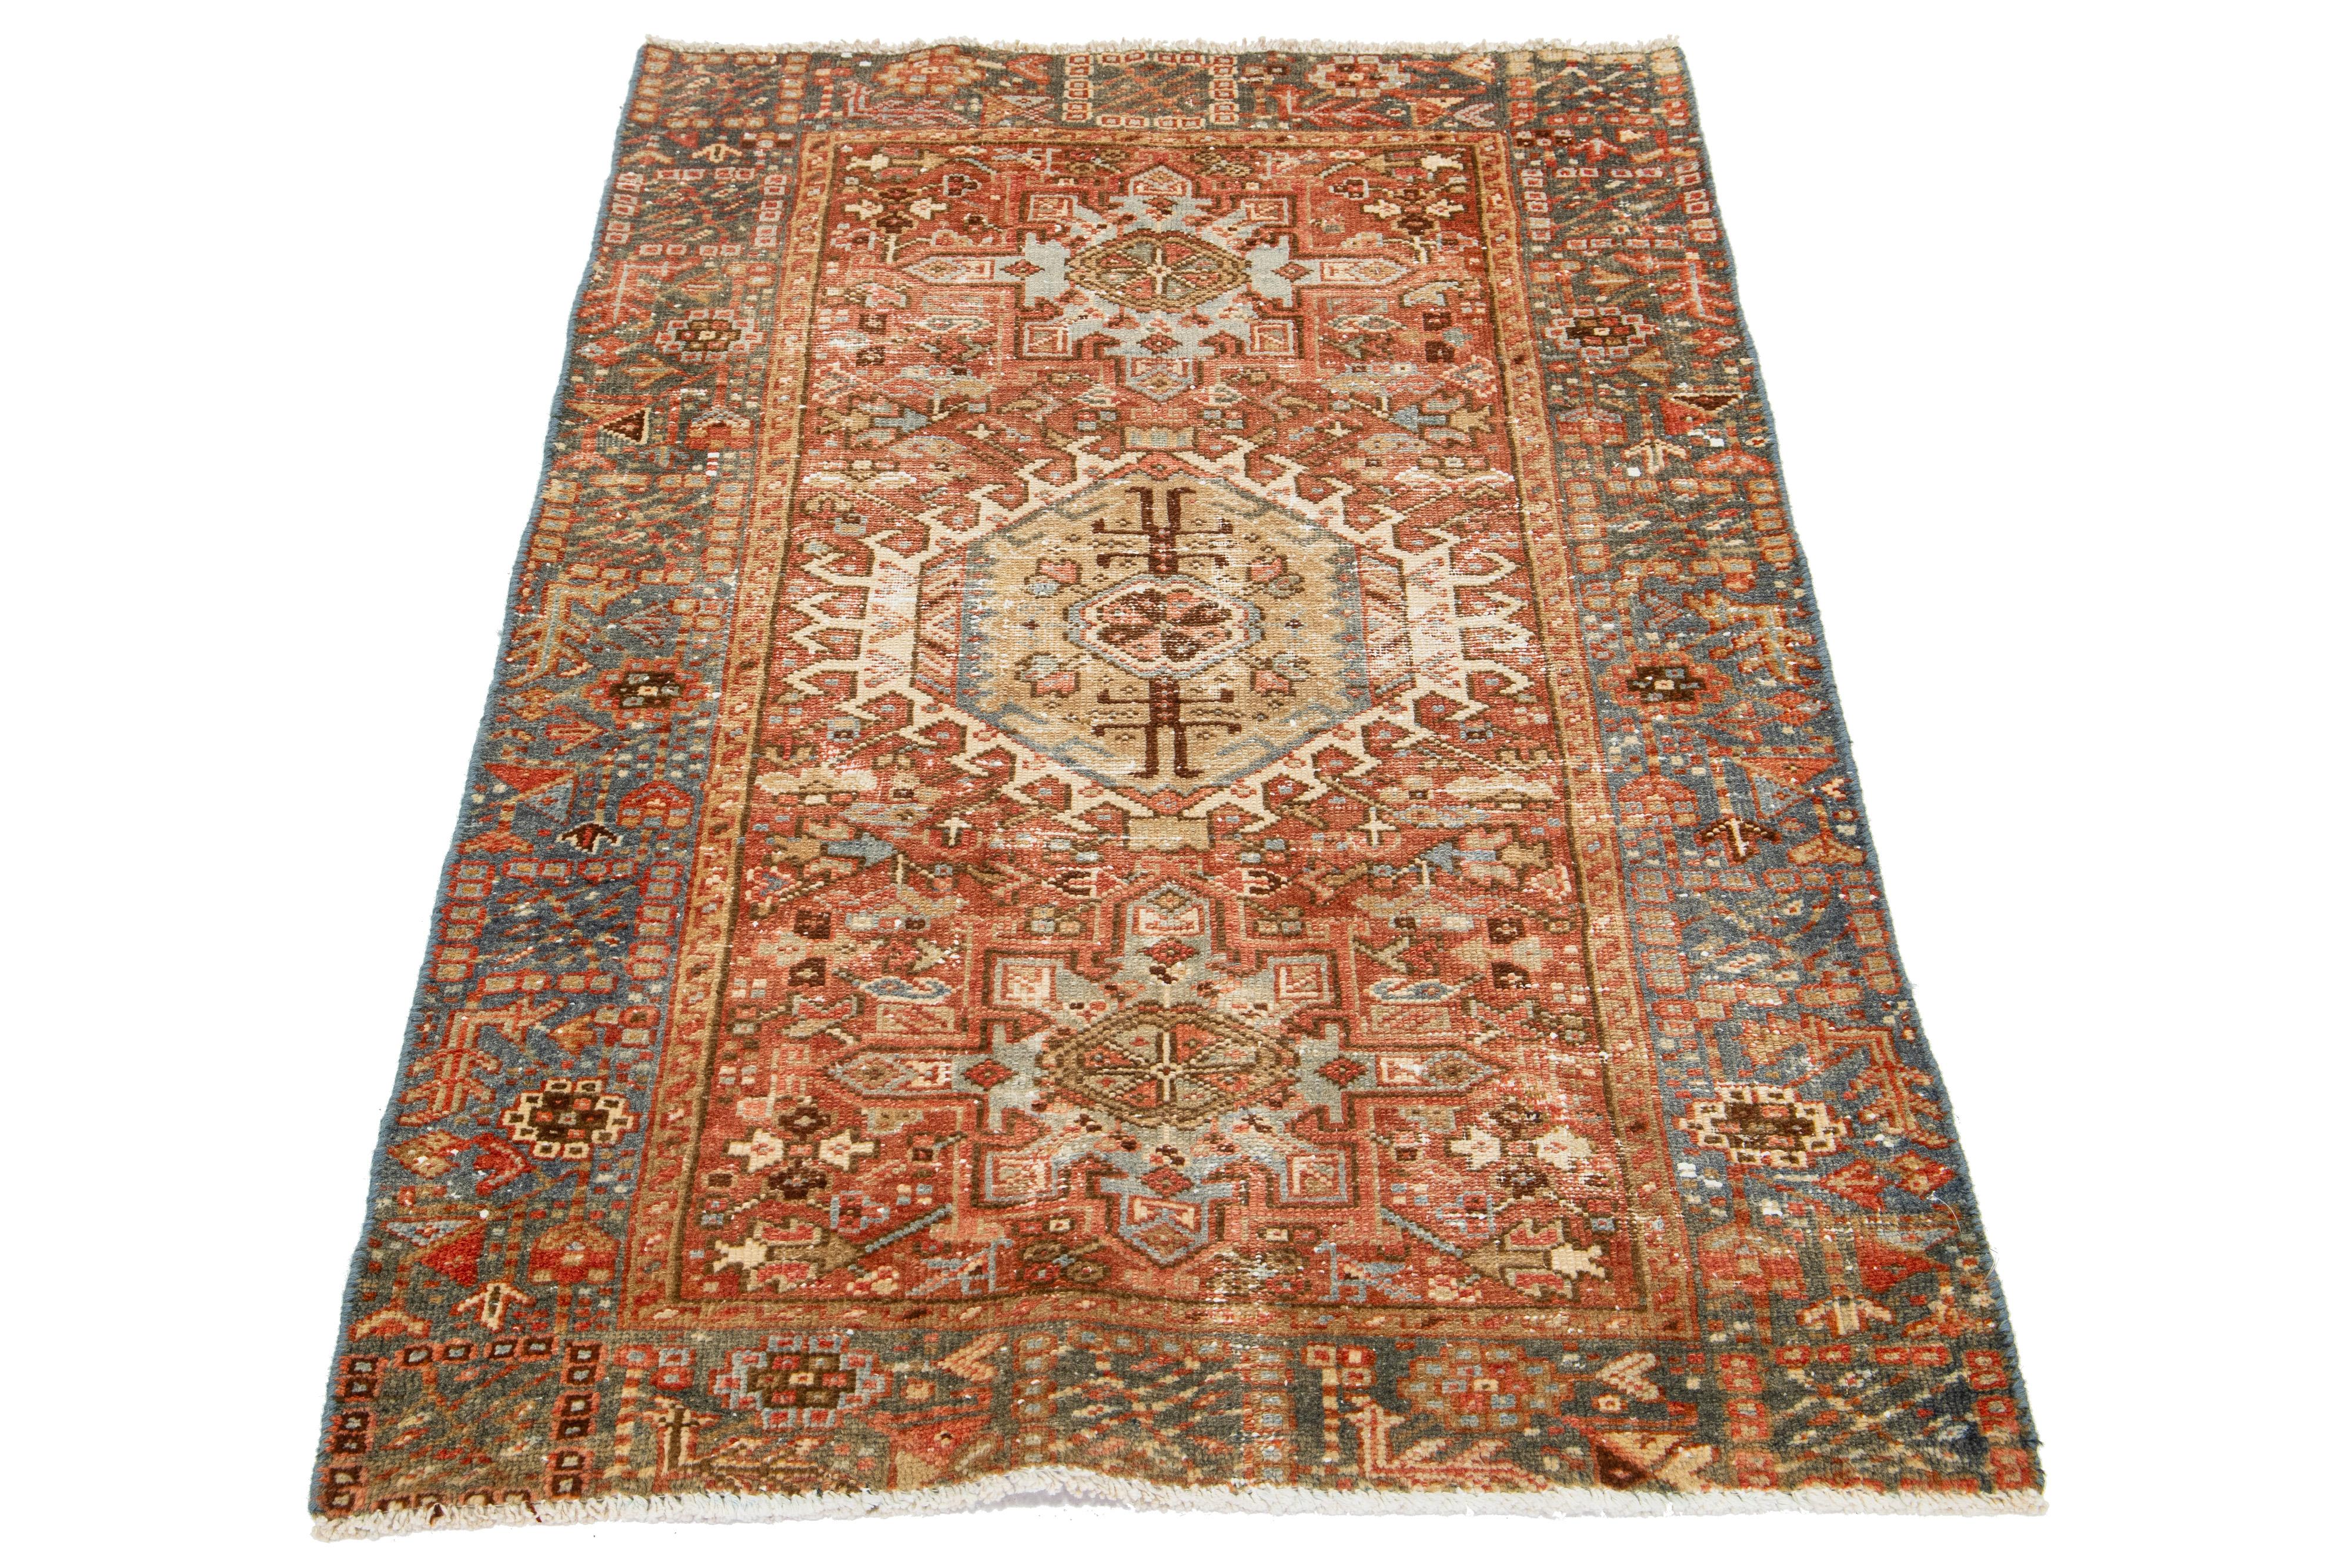 This antique Persian Heriz rug is crafted with hand-knotted wool. The rust field features a captivating medallion pattern embellished with beige, peach, and brown shades.

This rug measures 3' x 4'6